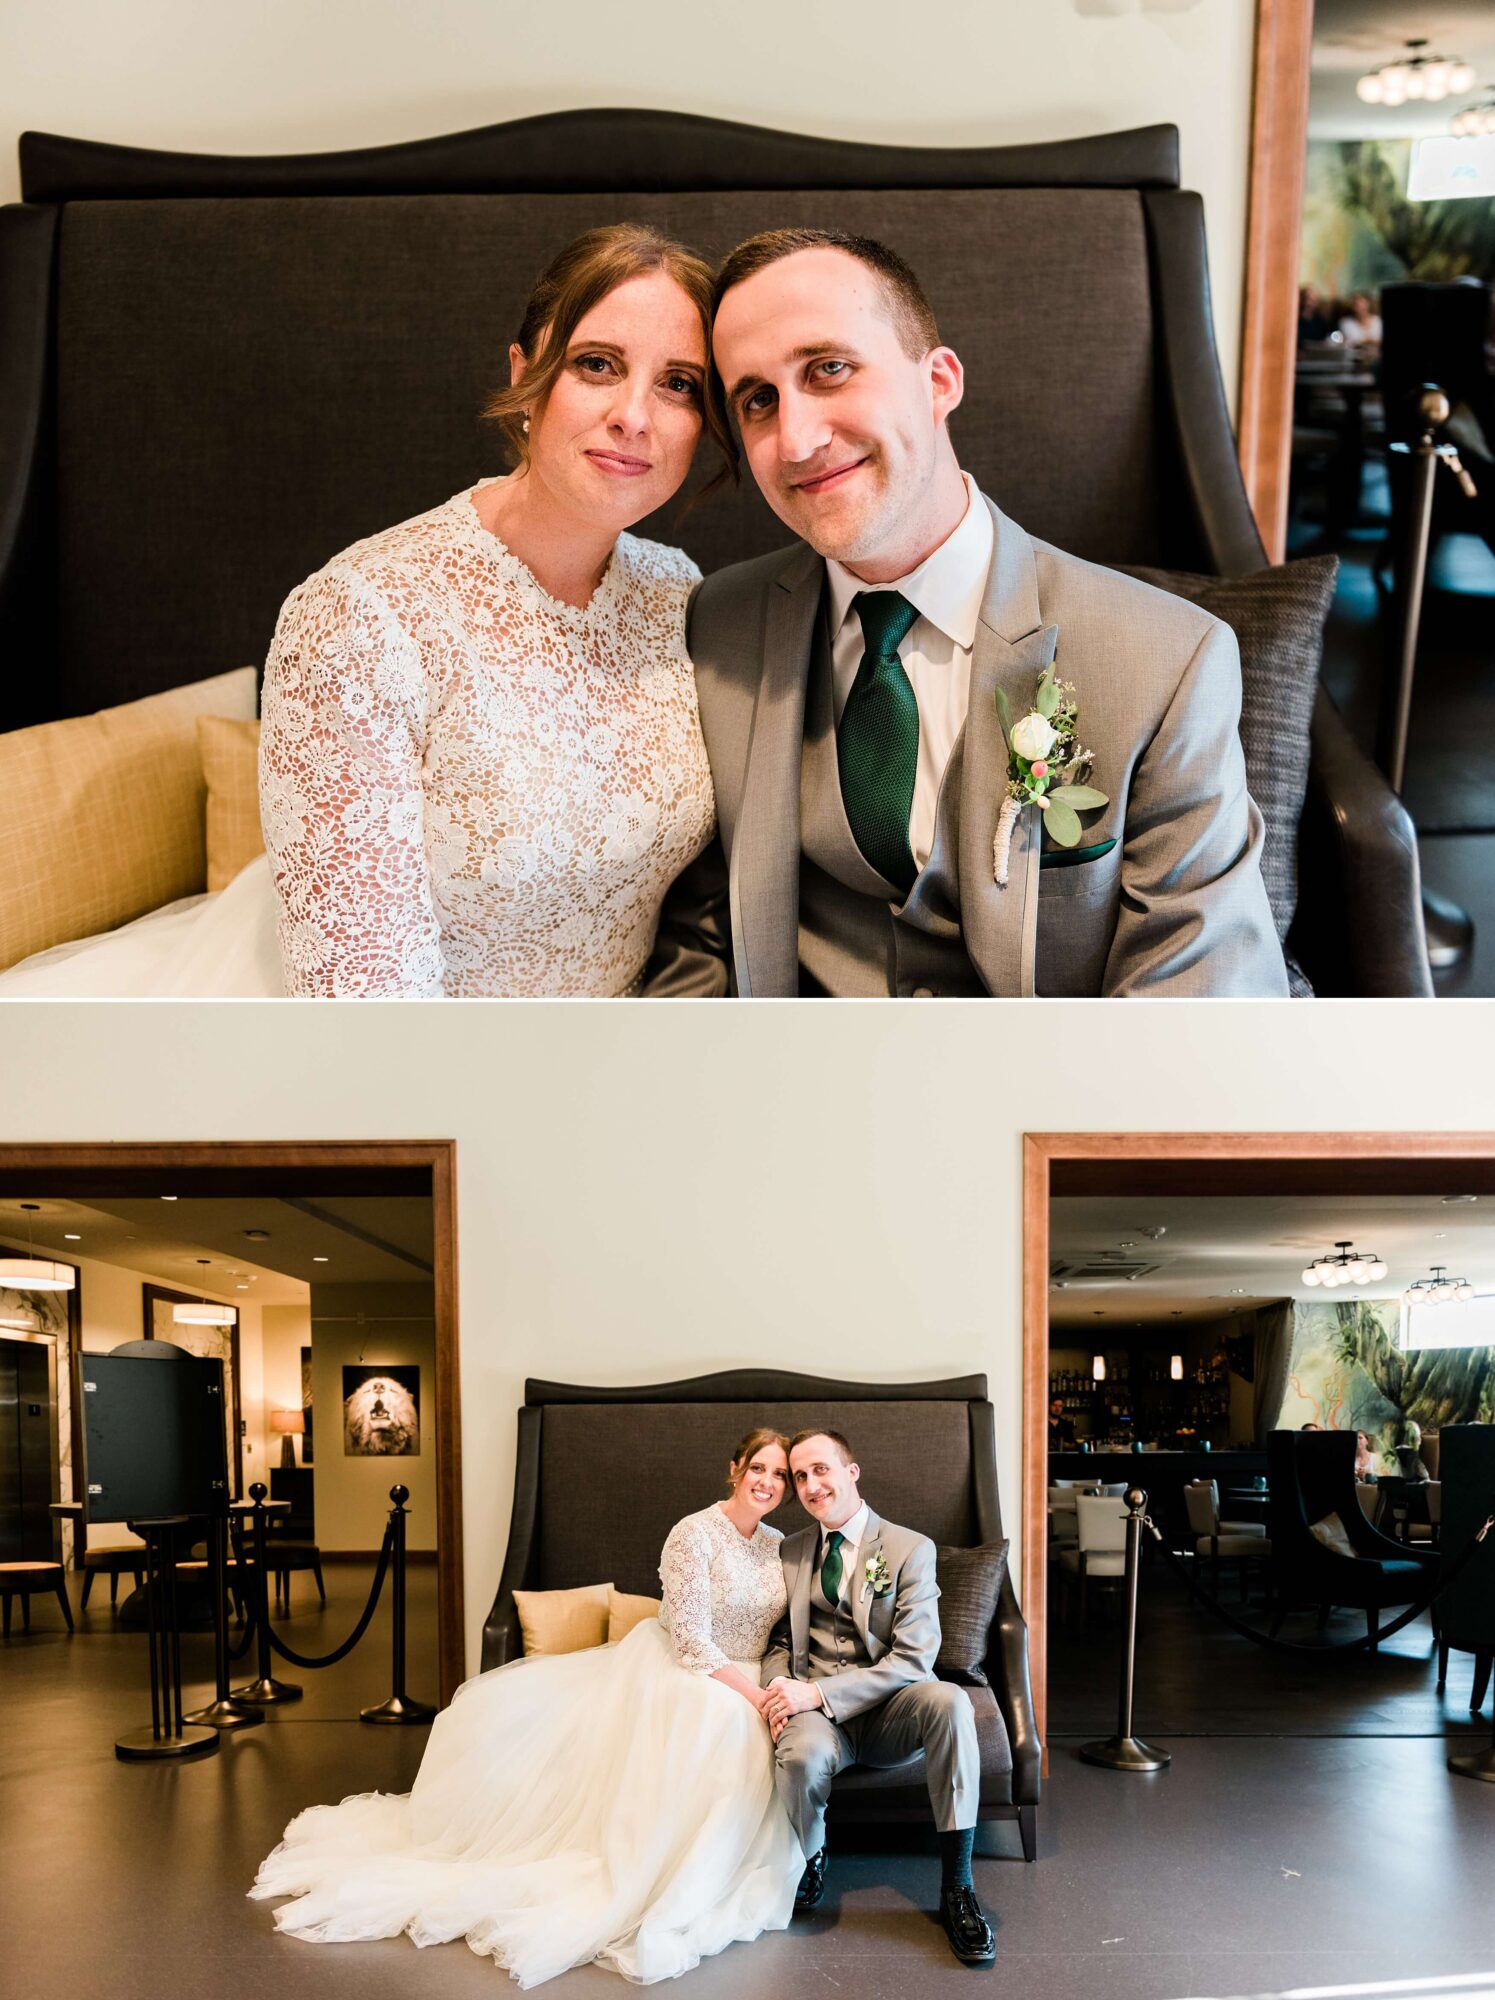 Stylish indoor portraits of the bride and groom at the Lodge at St. Edward Park